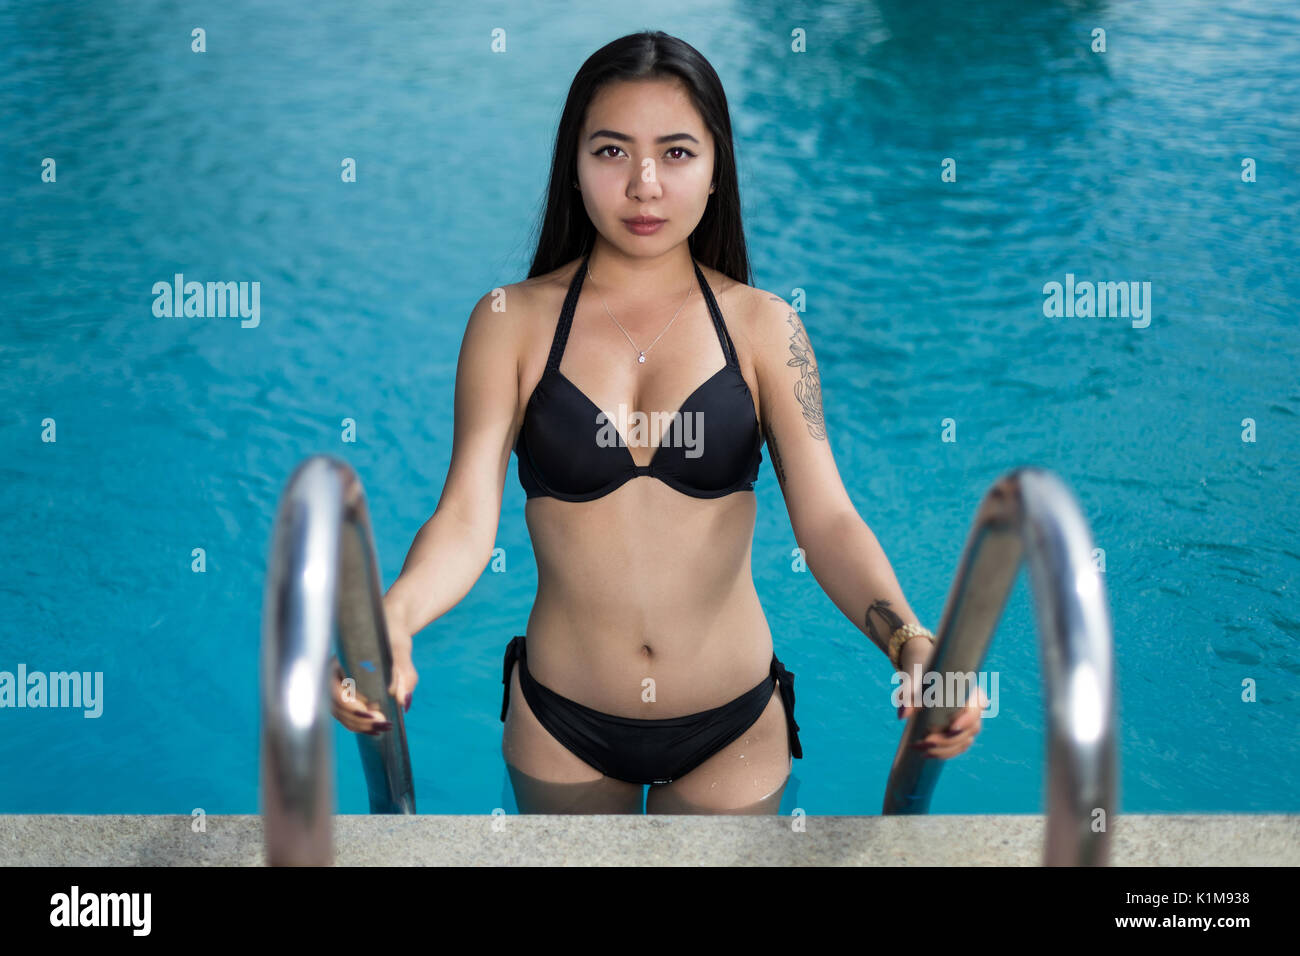 Asian young woman is climbing out of a swimming pool Stock Photo photo